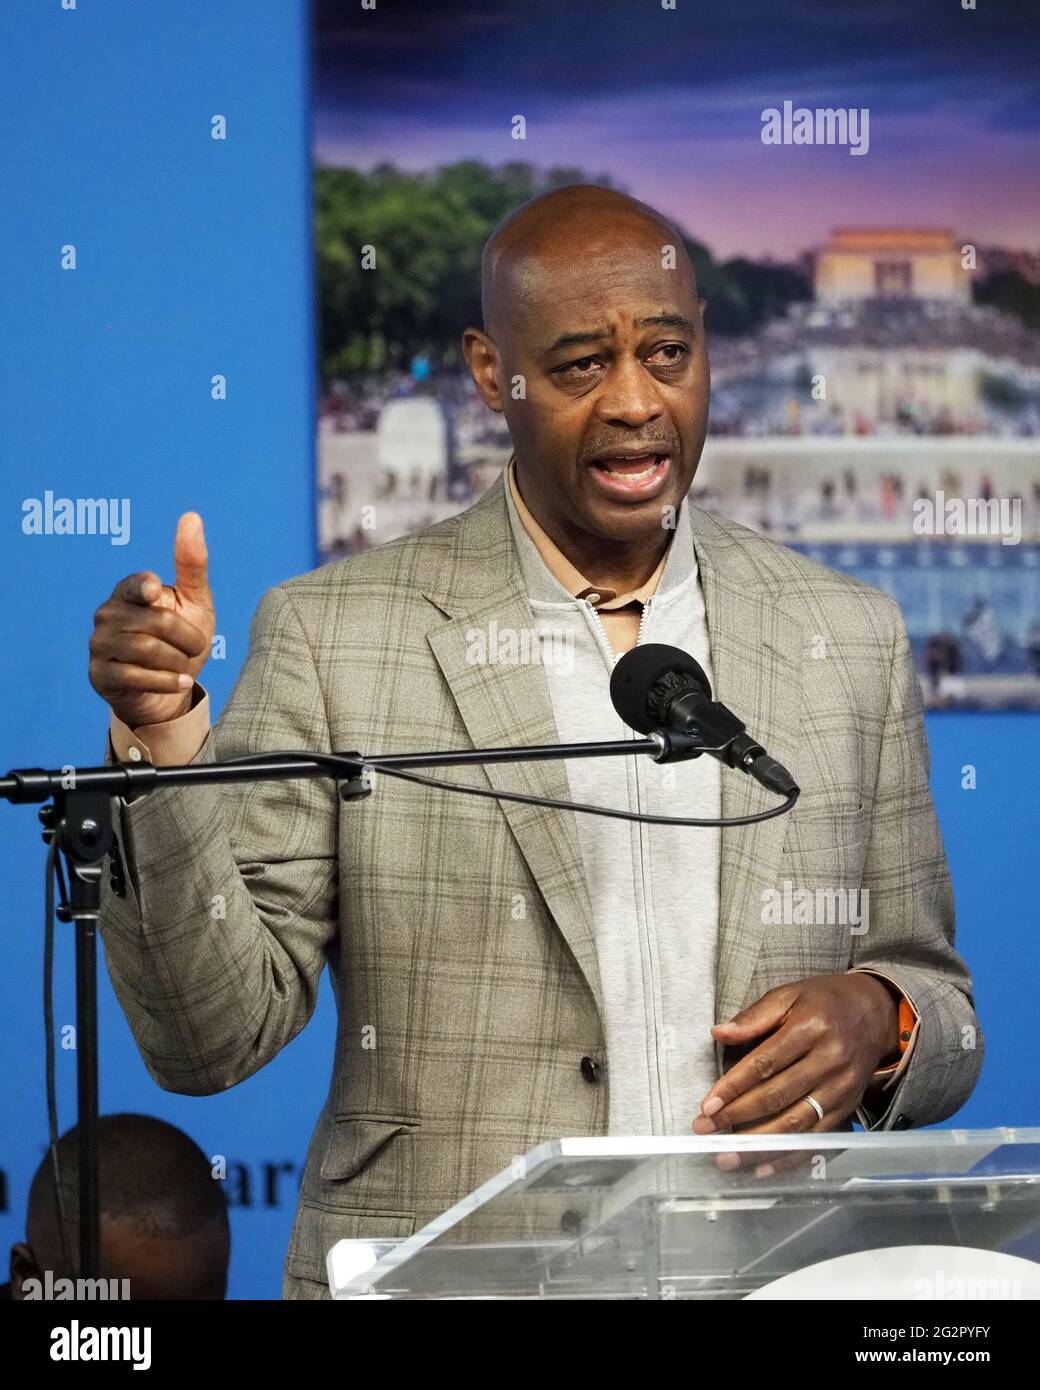 Manhattan, New York, USA. 12th June, 2021. NYC Mayoral Candidate Ray  Mcguire speaks at the Saturday Action Rally and Broadcast with Rev. Al  Sharpton at the National News Network in Harlem Credit: